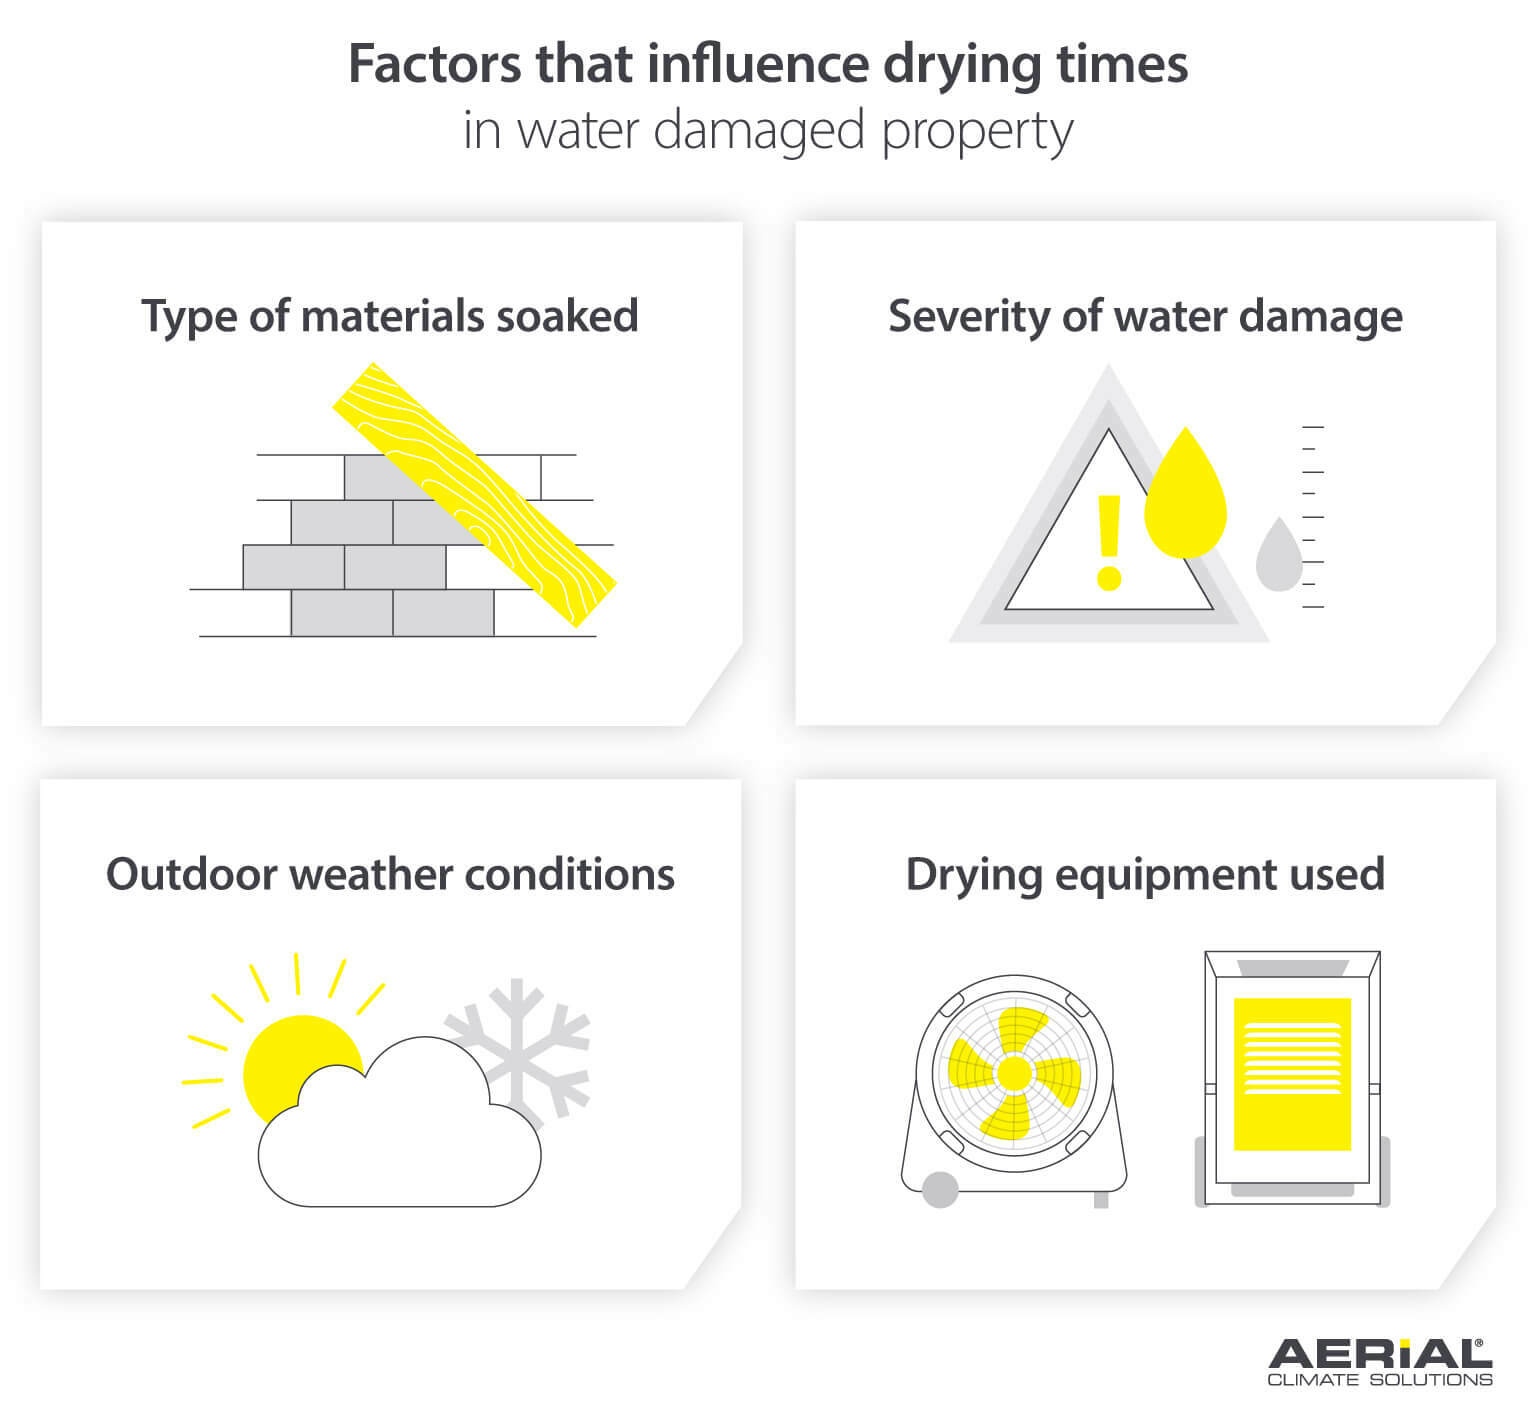 An Infographic illustrating 4 Factors that influence drying times in a water damaged property including: the types of materials soaked, the severity of water damage, outdoor weather conditions, and drying equipment used